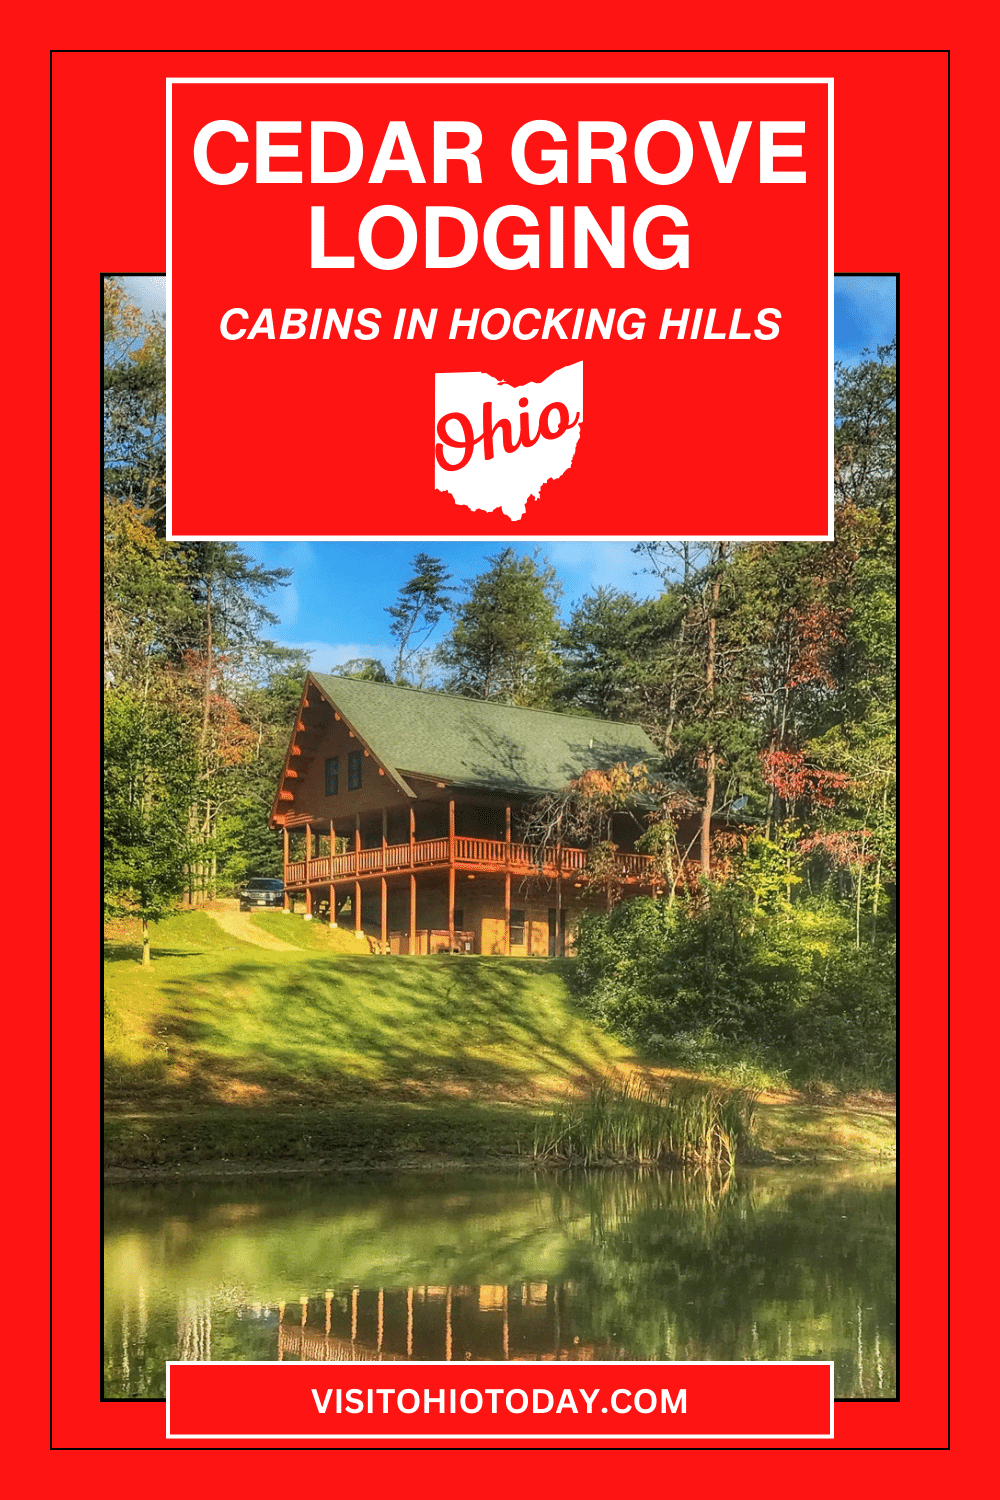 Cedar Grove Lodging is a destination within the heart of the Hocking Hills region. The 65 acre property offers accommodations for 1-85 people. #hockinghills #logan #loganohio #cedargrovelodging #cedargrove